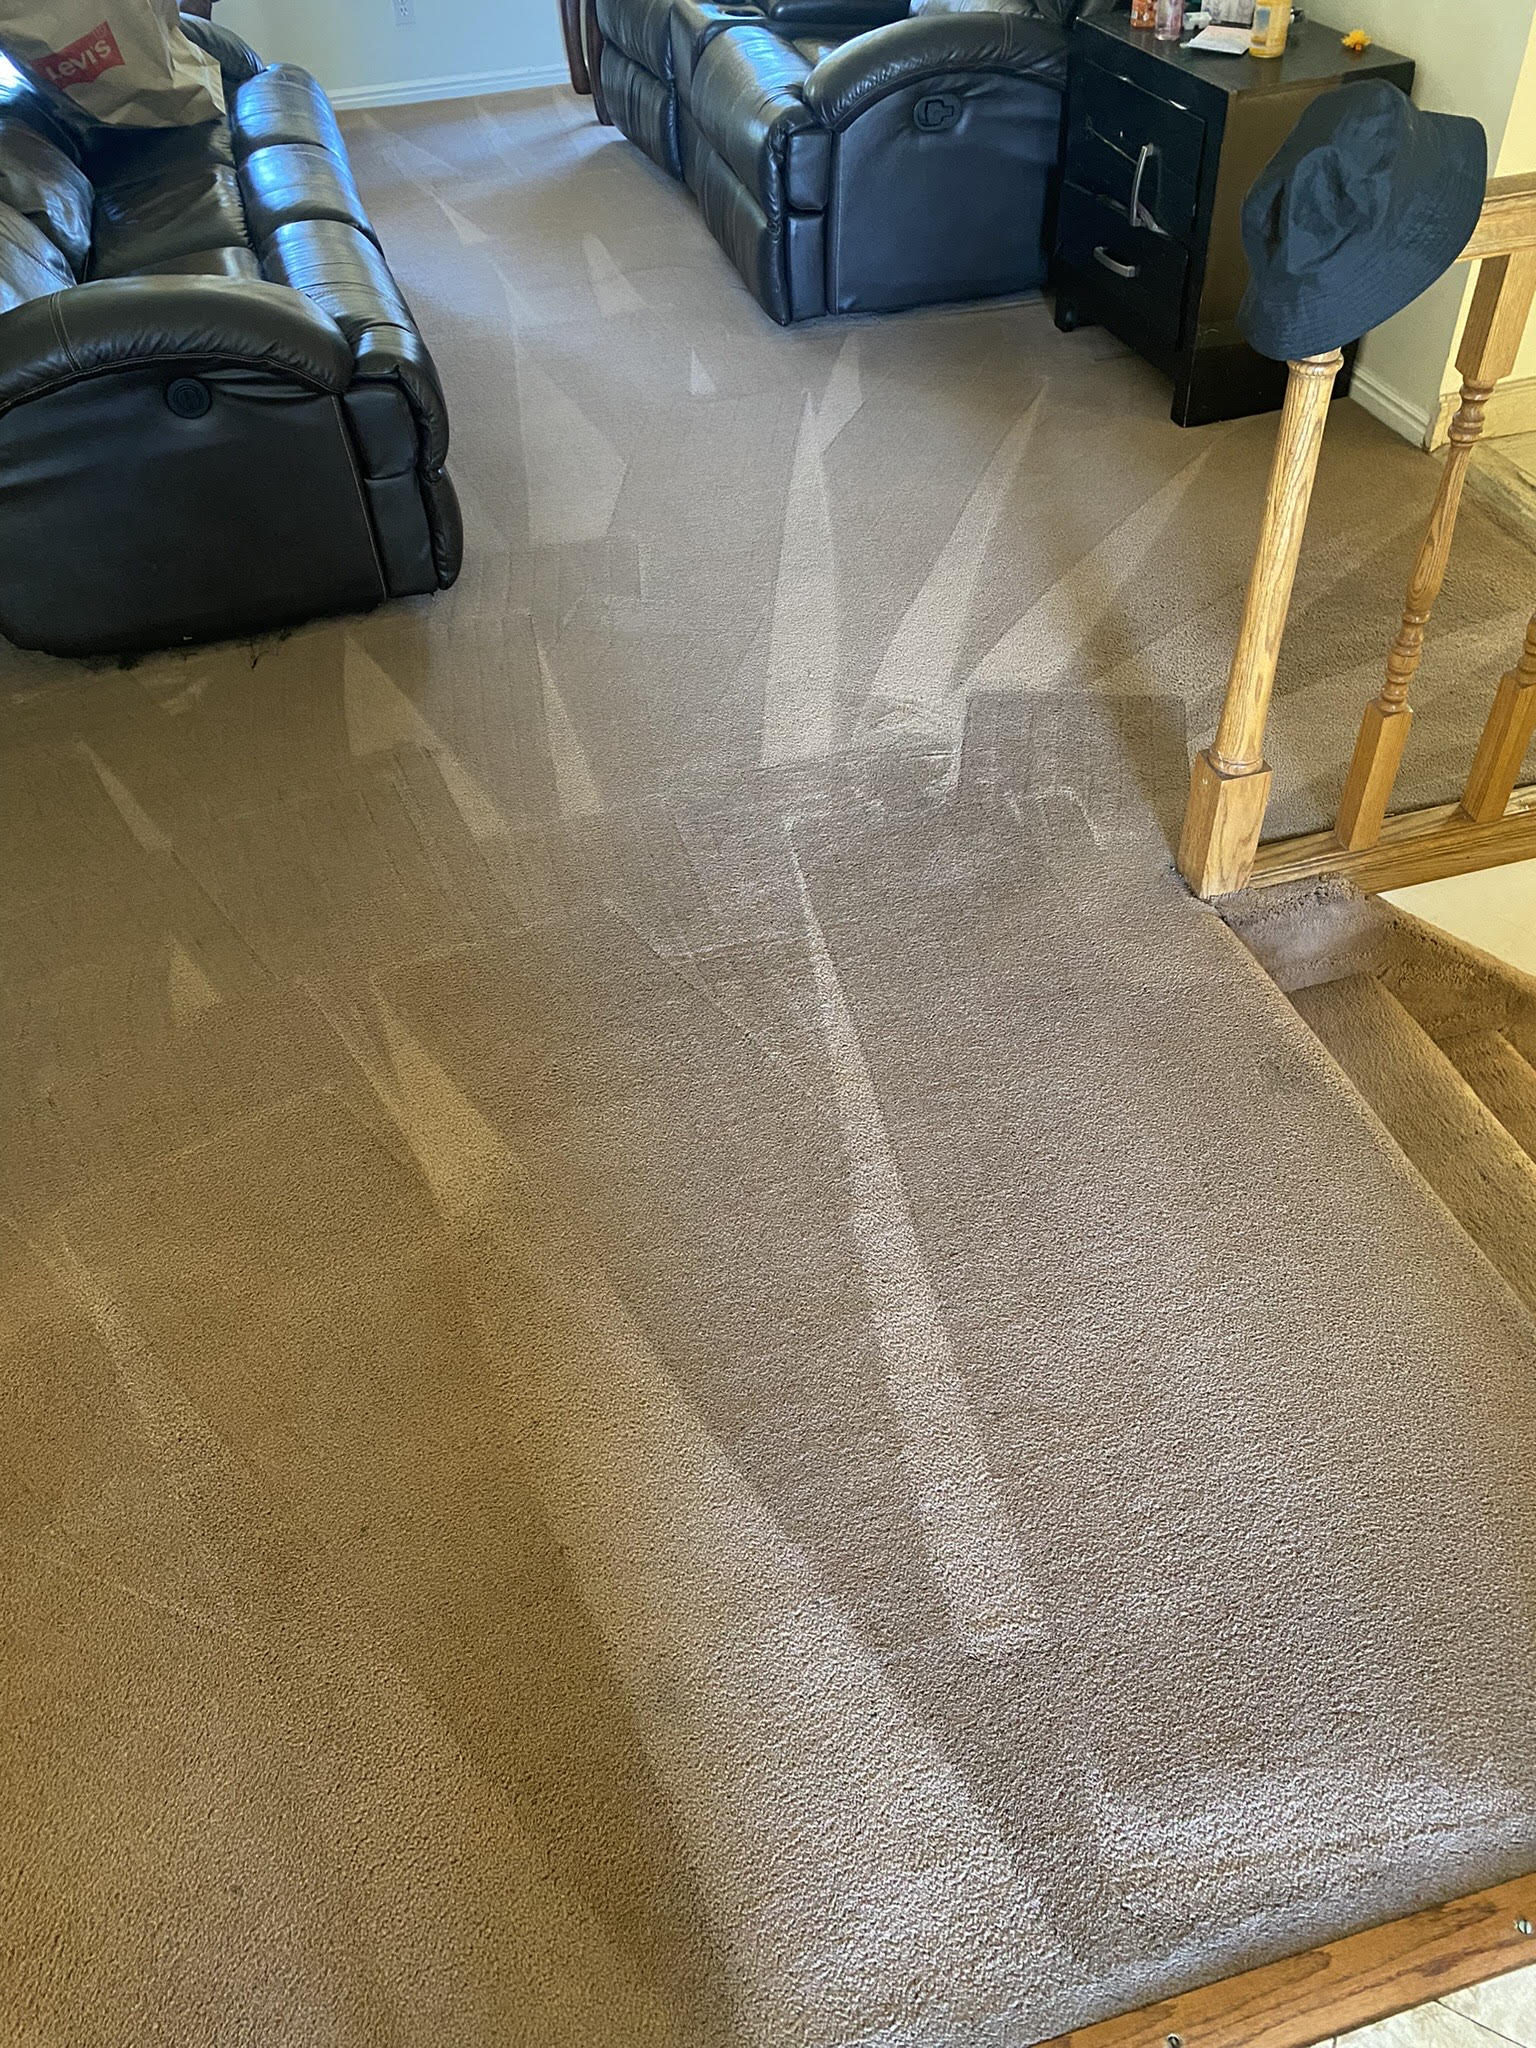 MK ProSteam Carpet Cleaning before and after image